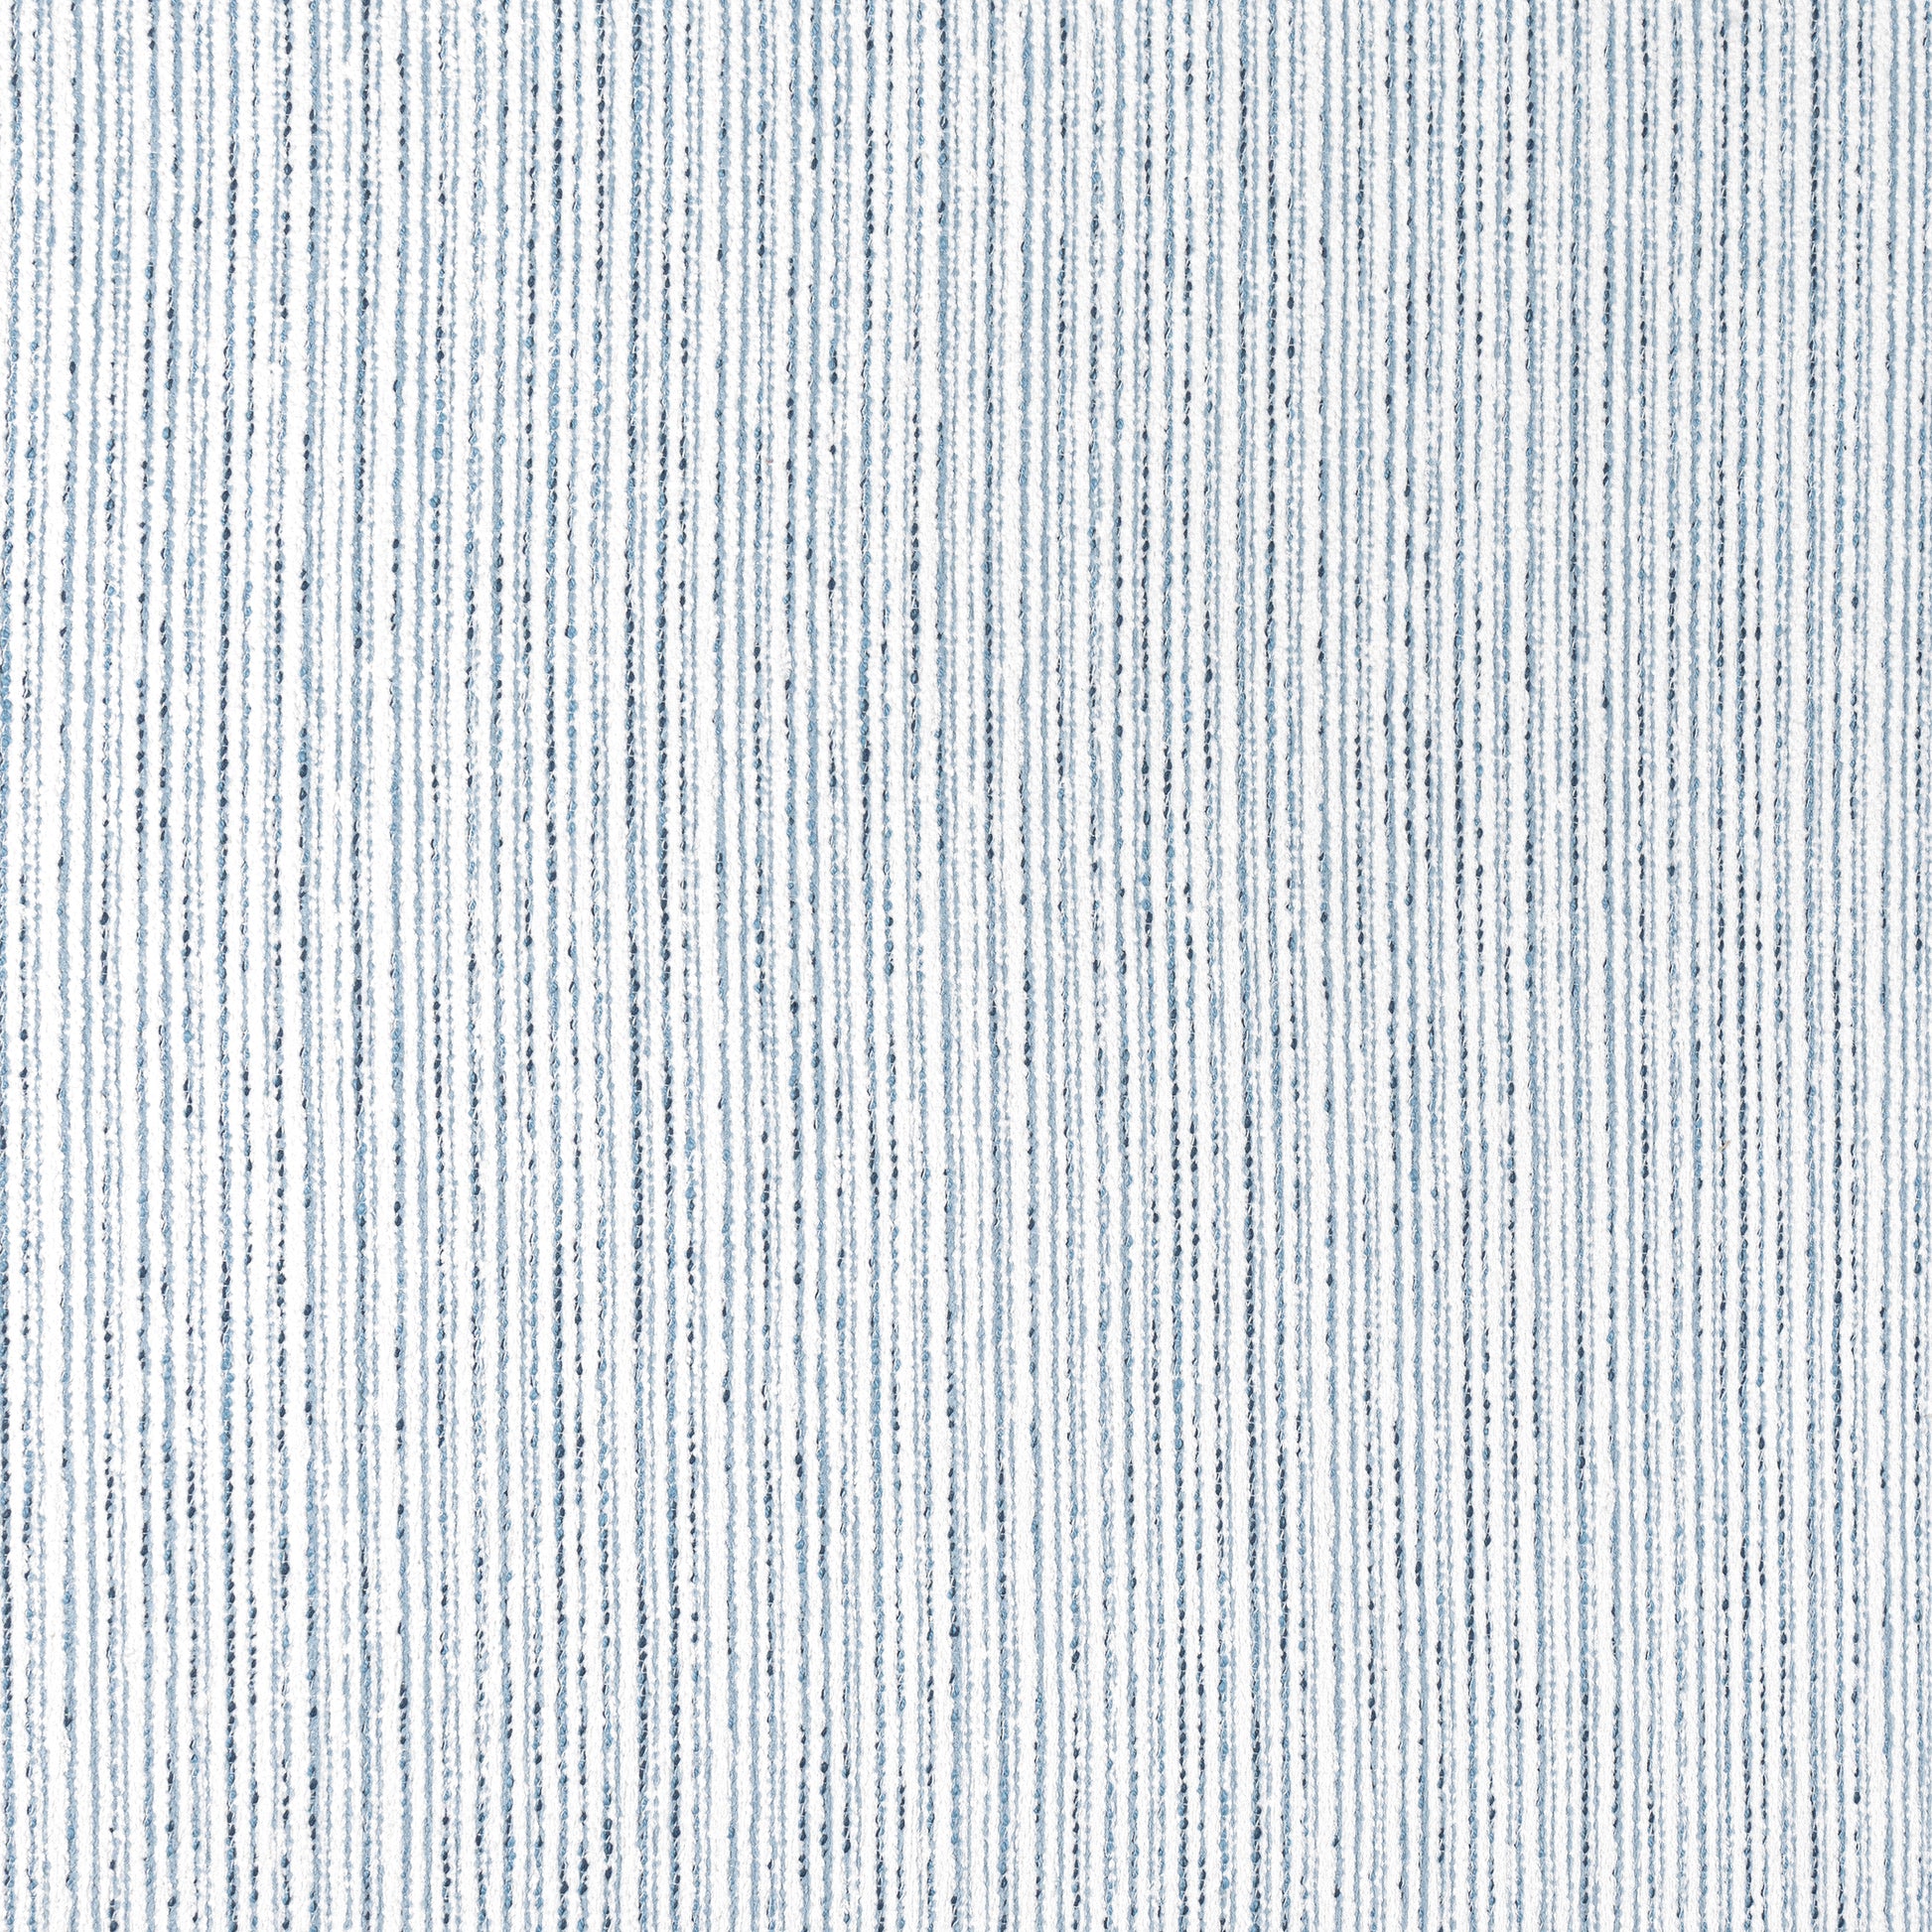 Purchase Thibaut Fabric Pattern# W8806 pattern name Zia Stripe color Sky